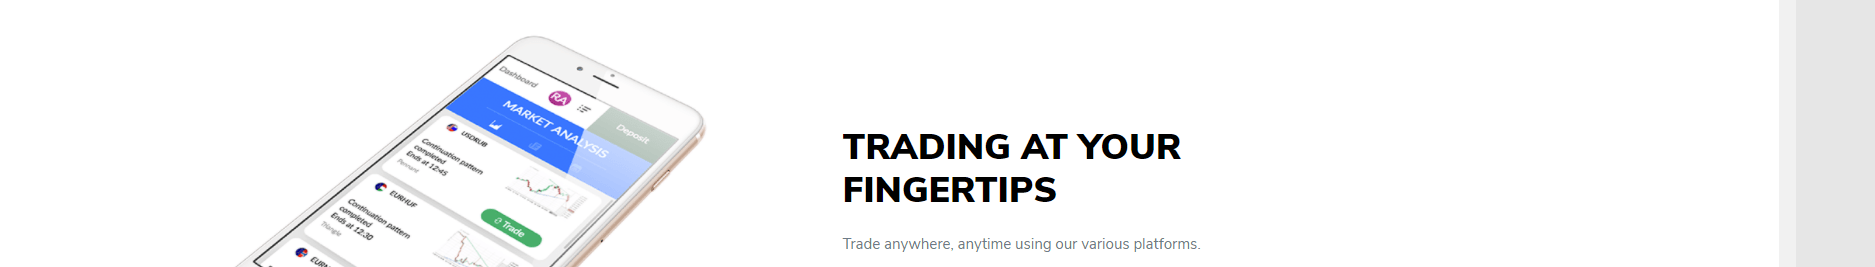 Trading At Your Fingertips